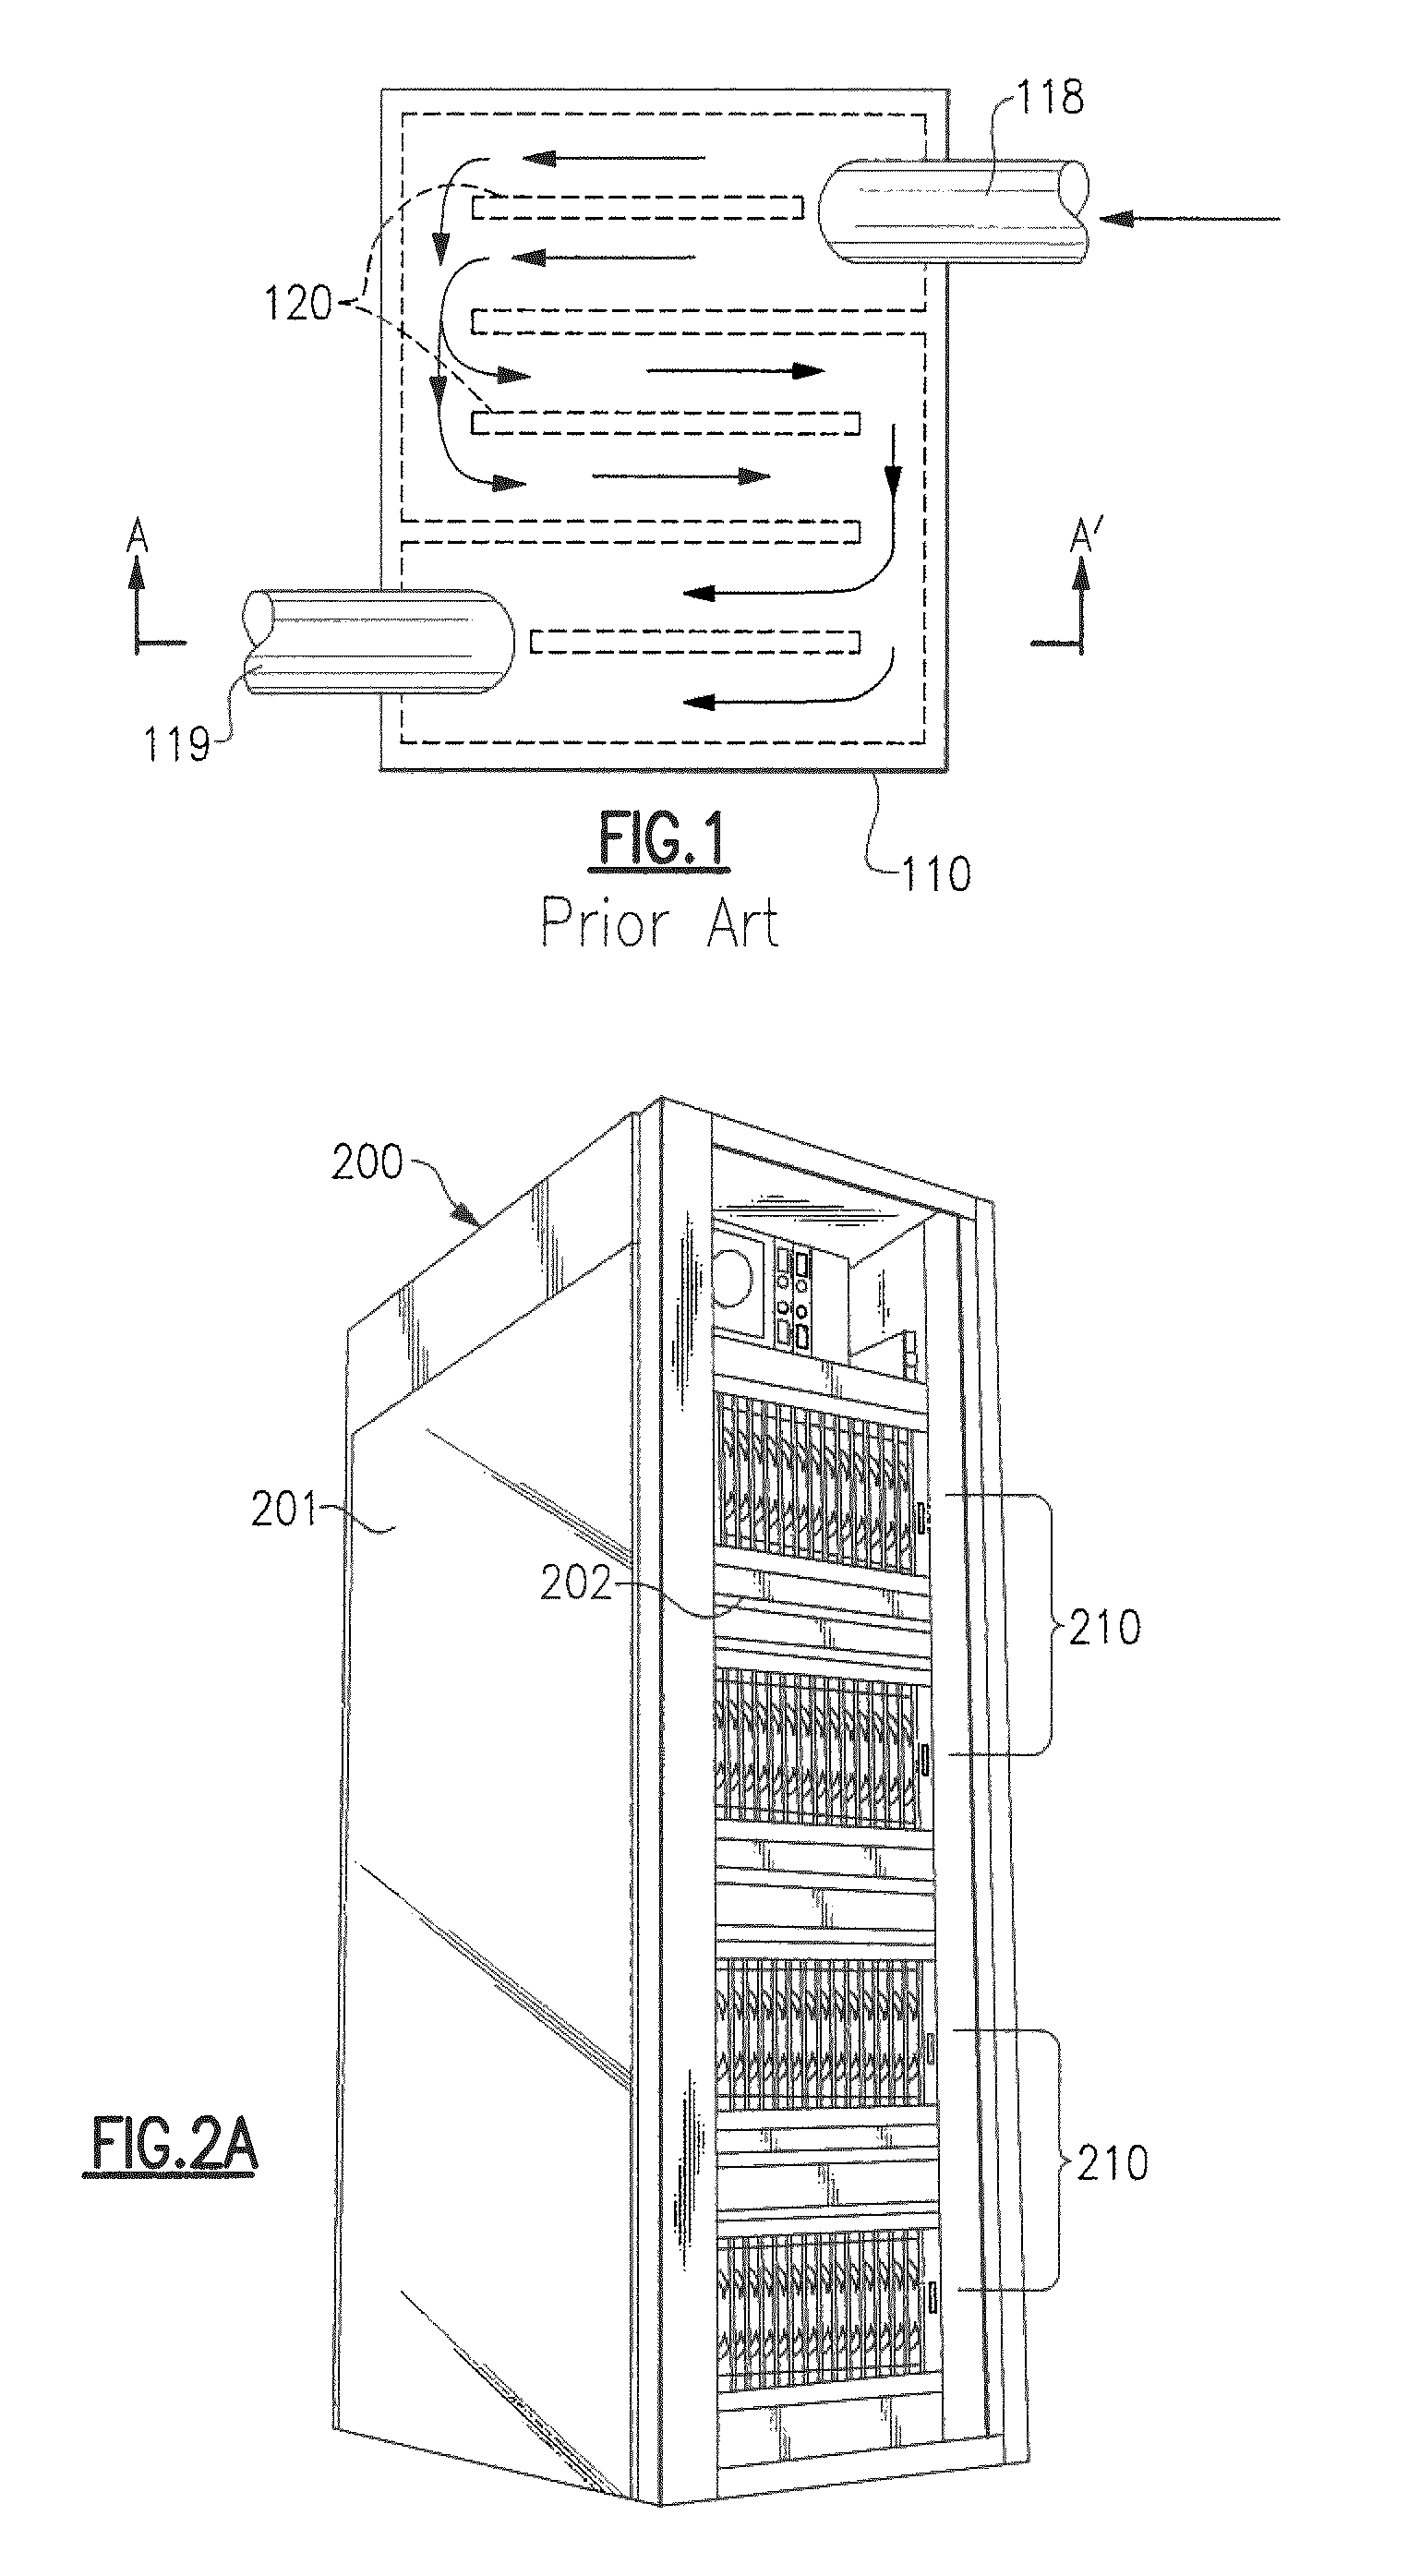 Open flow cold plate for liquid cooled electronic packages